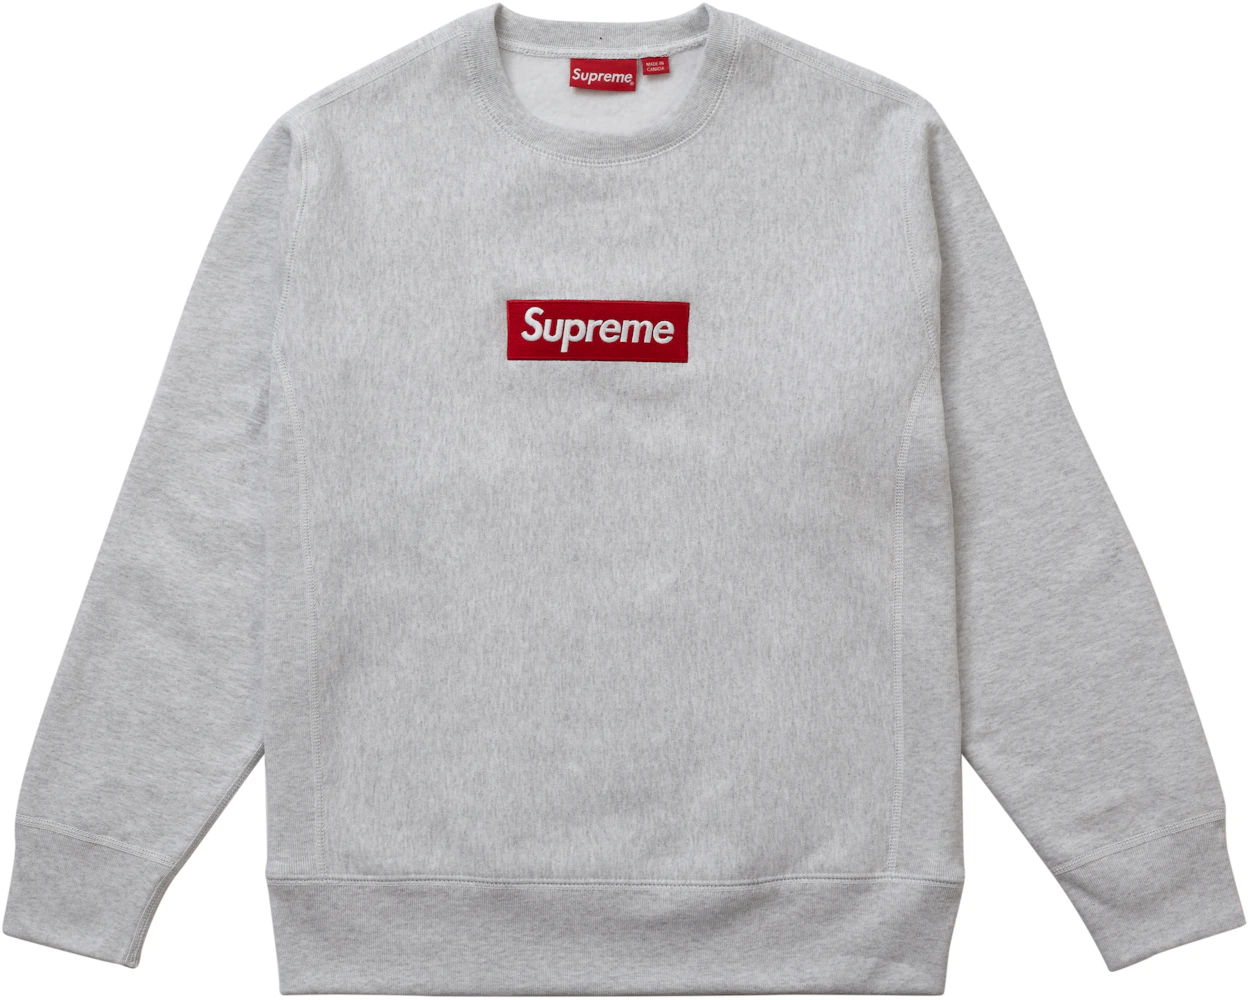 Supreme Gear just in ! Pre owned Supreme Dark Green Box Logo Crewneck Size  Large for $160 ! Brand new Supreme The North Face Steep Tech…